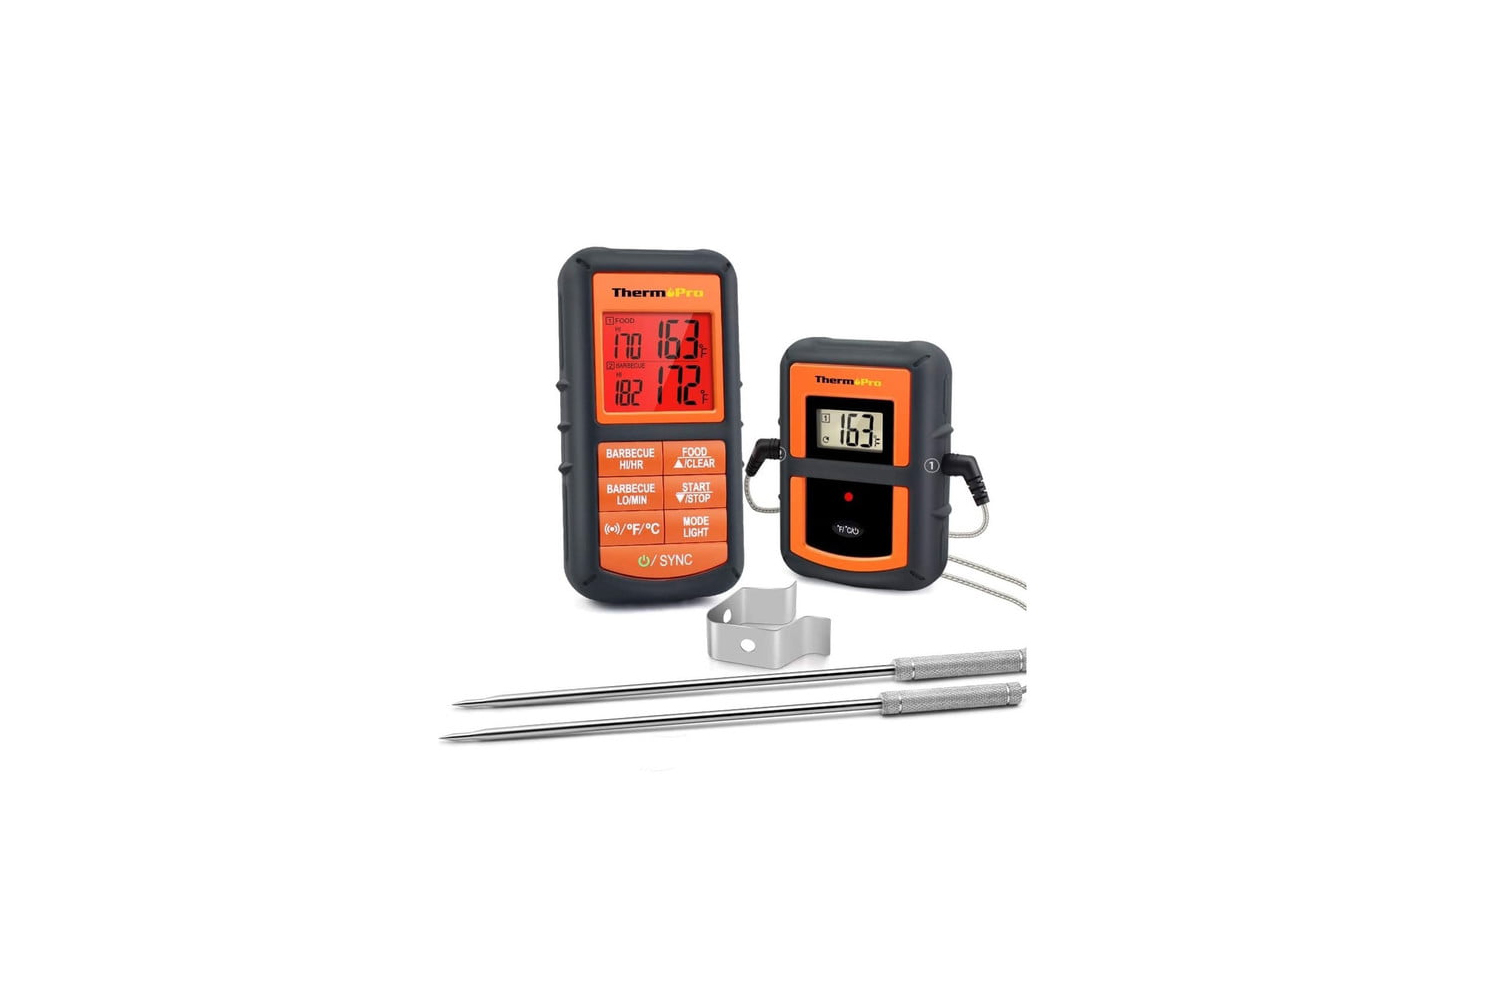 https://www.themanual.com/wp-content/uploads/sites/9/2022/03/thermopro-tp07s-wireless-remote-grill-thermometer.jpg?fit=800%2C800&p=1